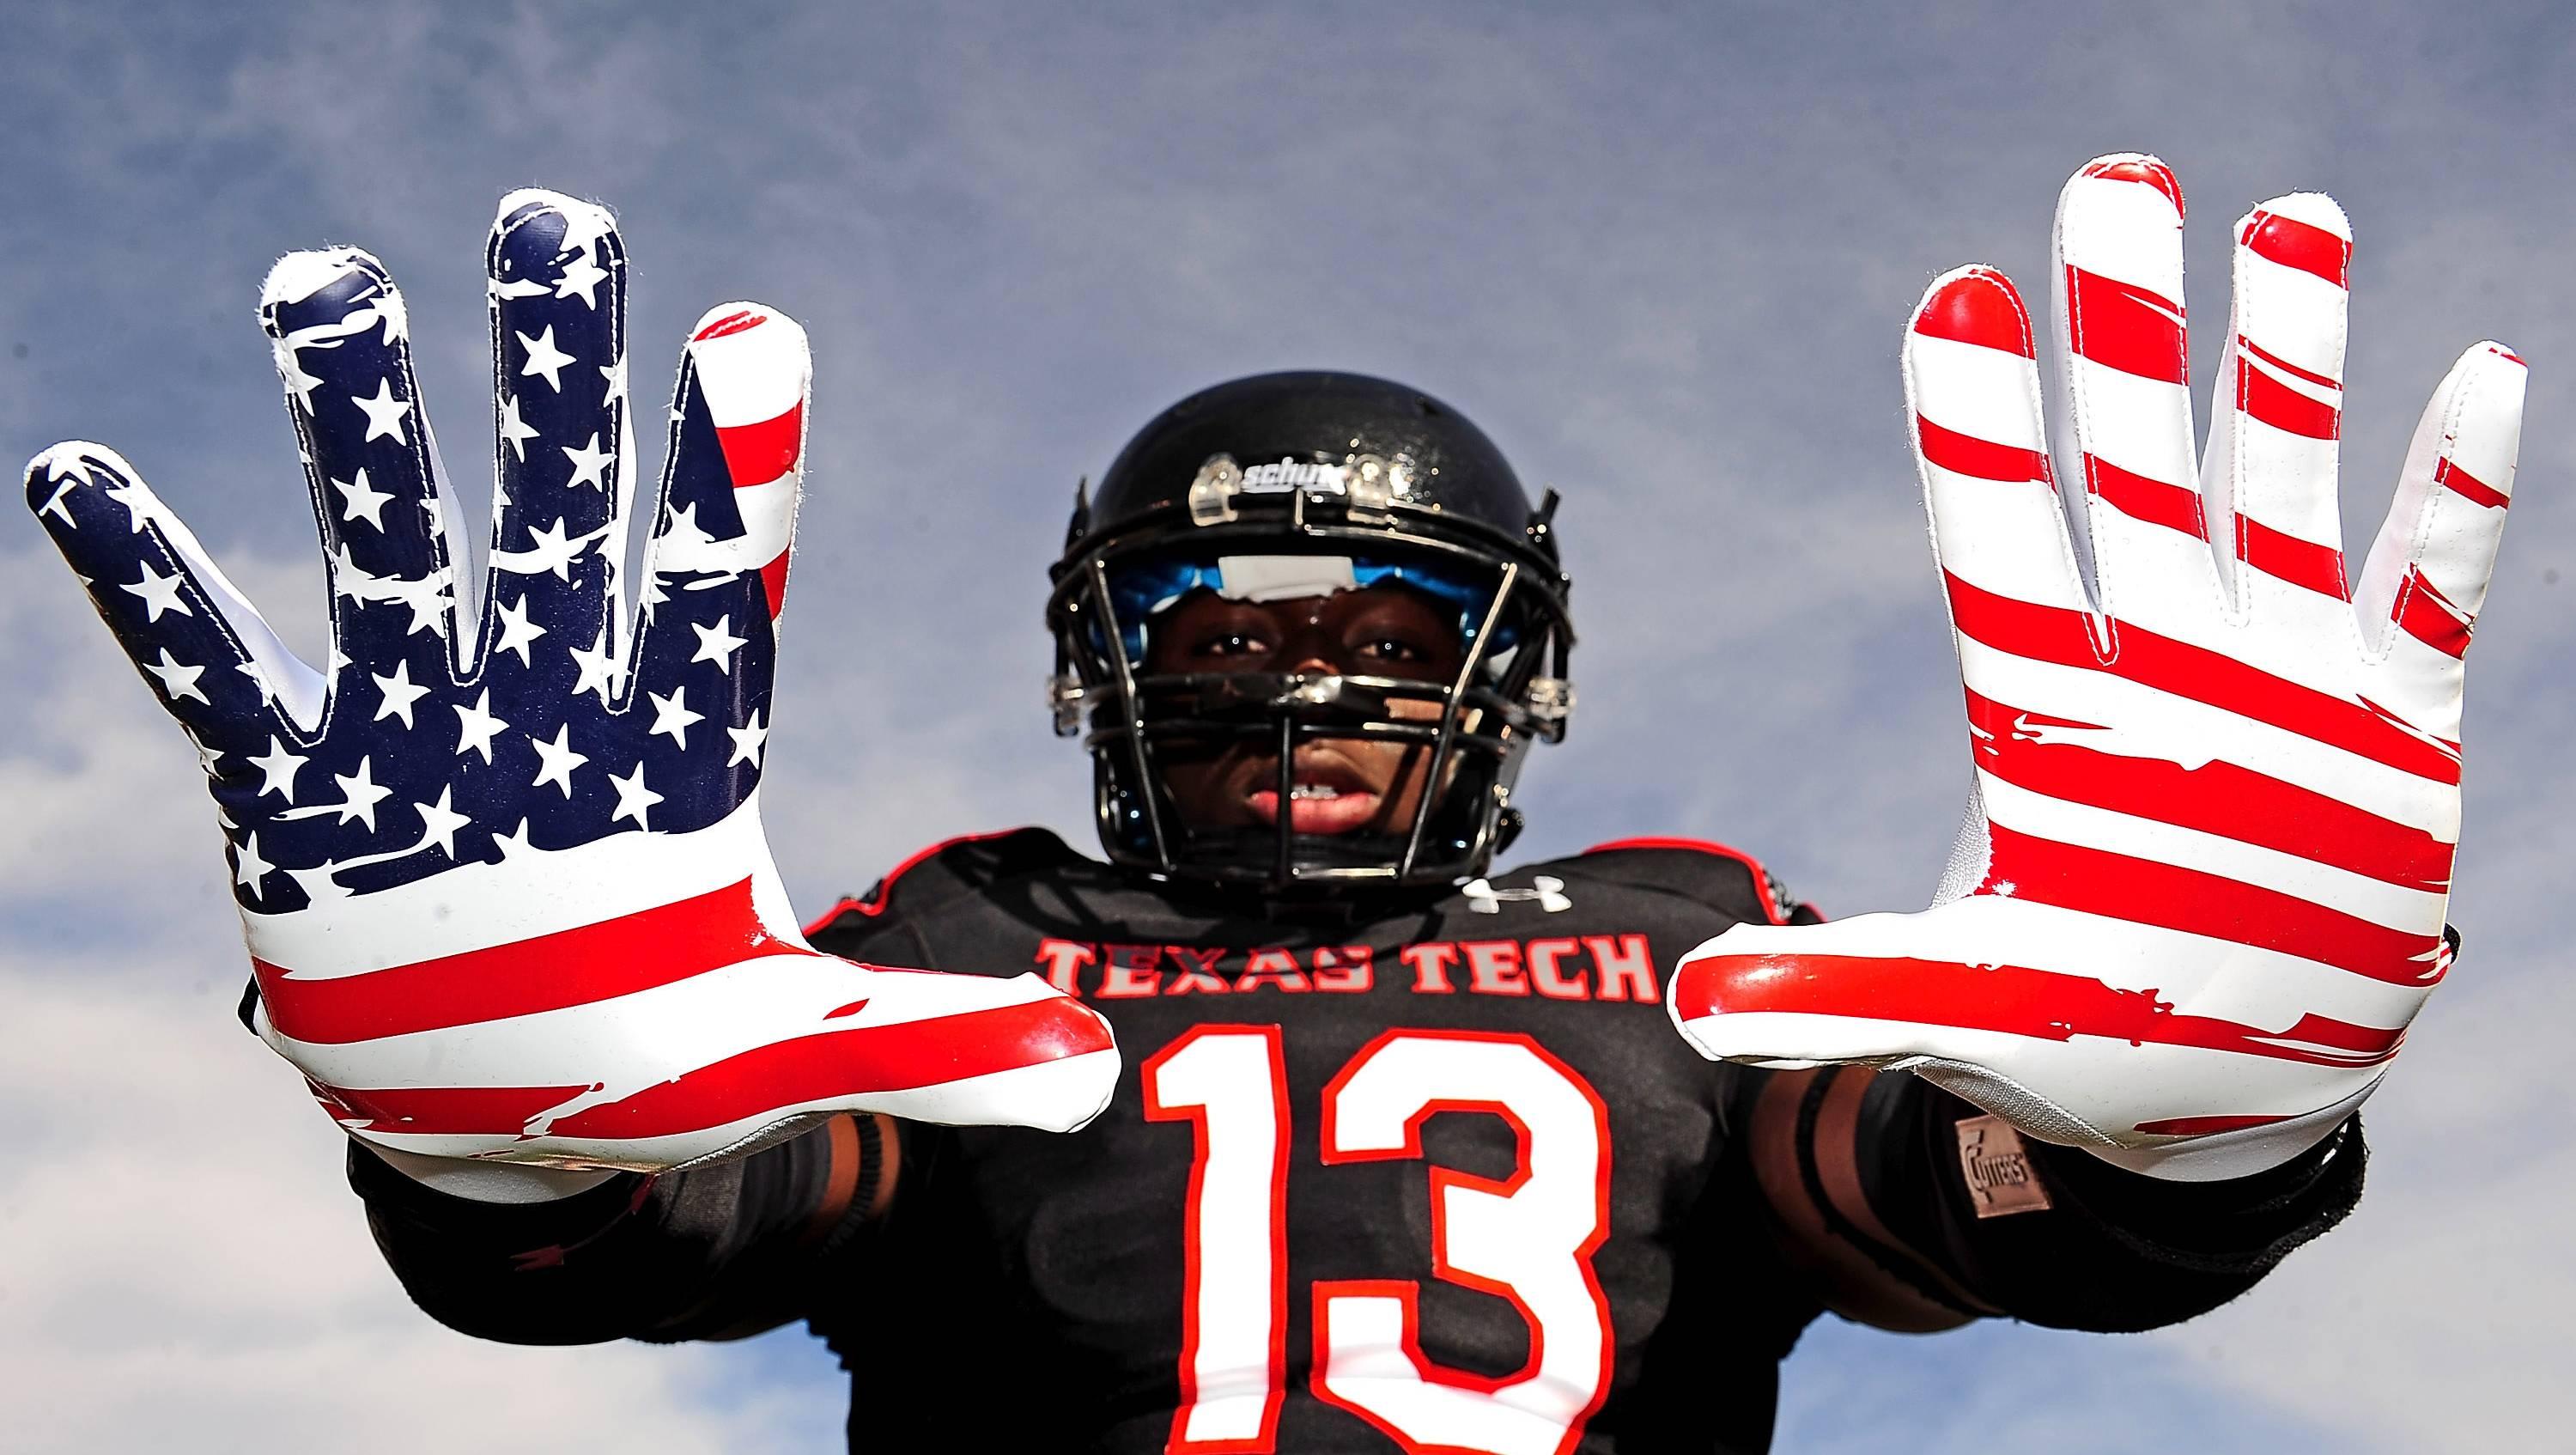 Texas Tech Red Raiders wide receiver Jakeem Grant (13) shows off his U.S. flag gloves.